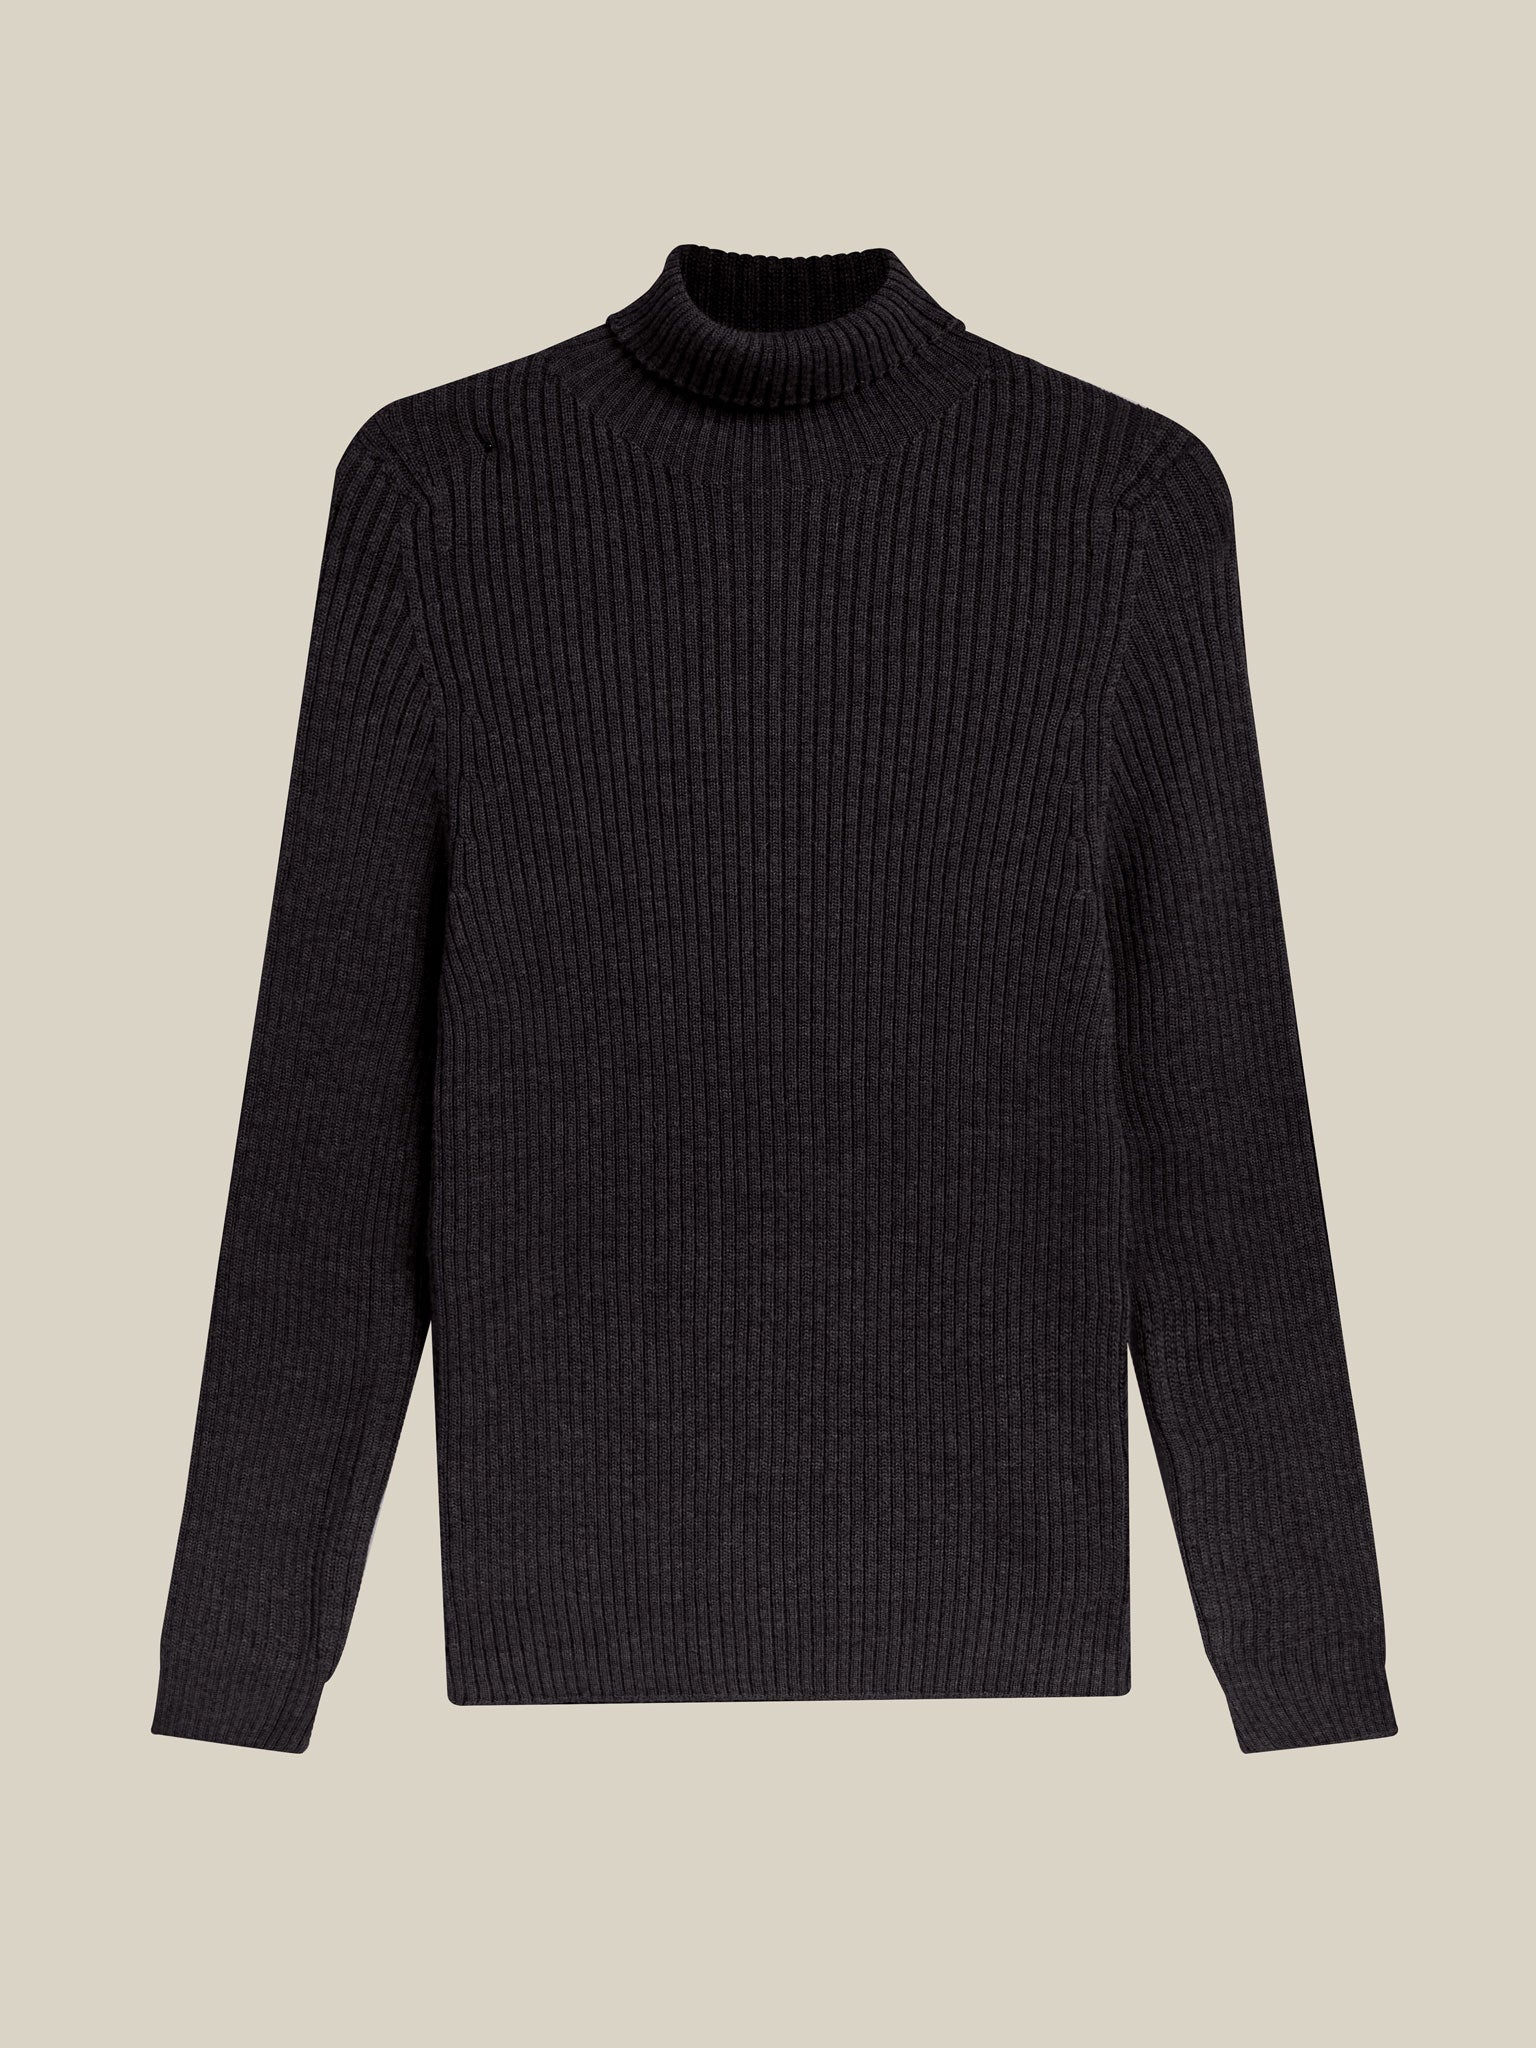 roll neck grey jumper, perfect for smart and comfortable travel attire